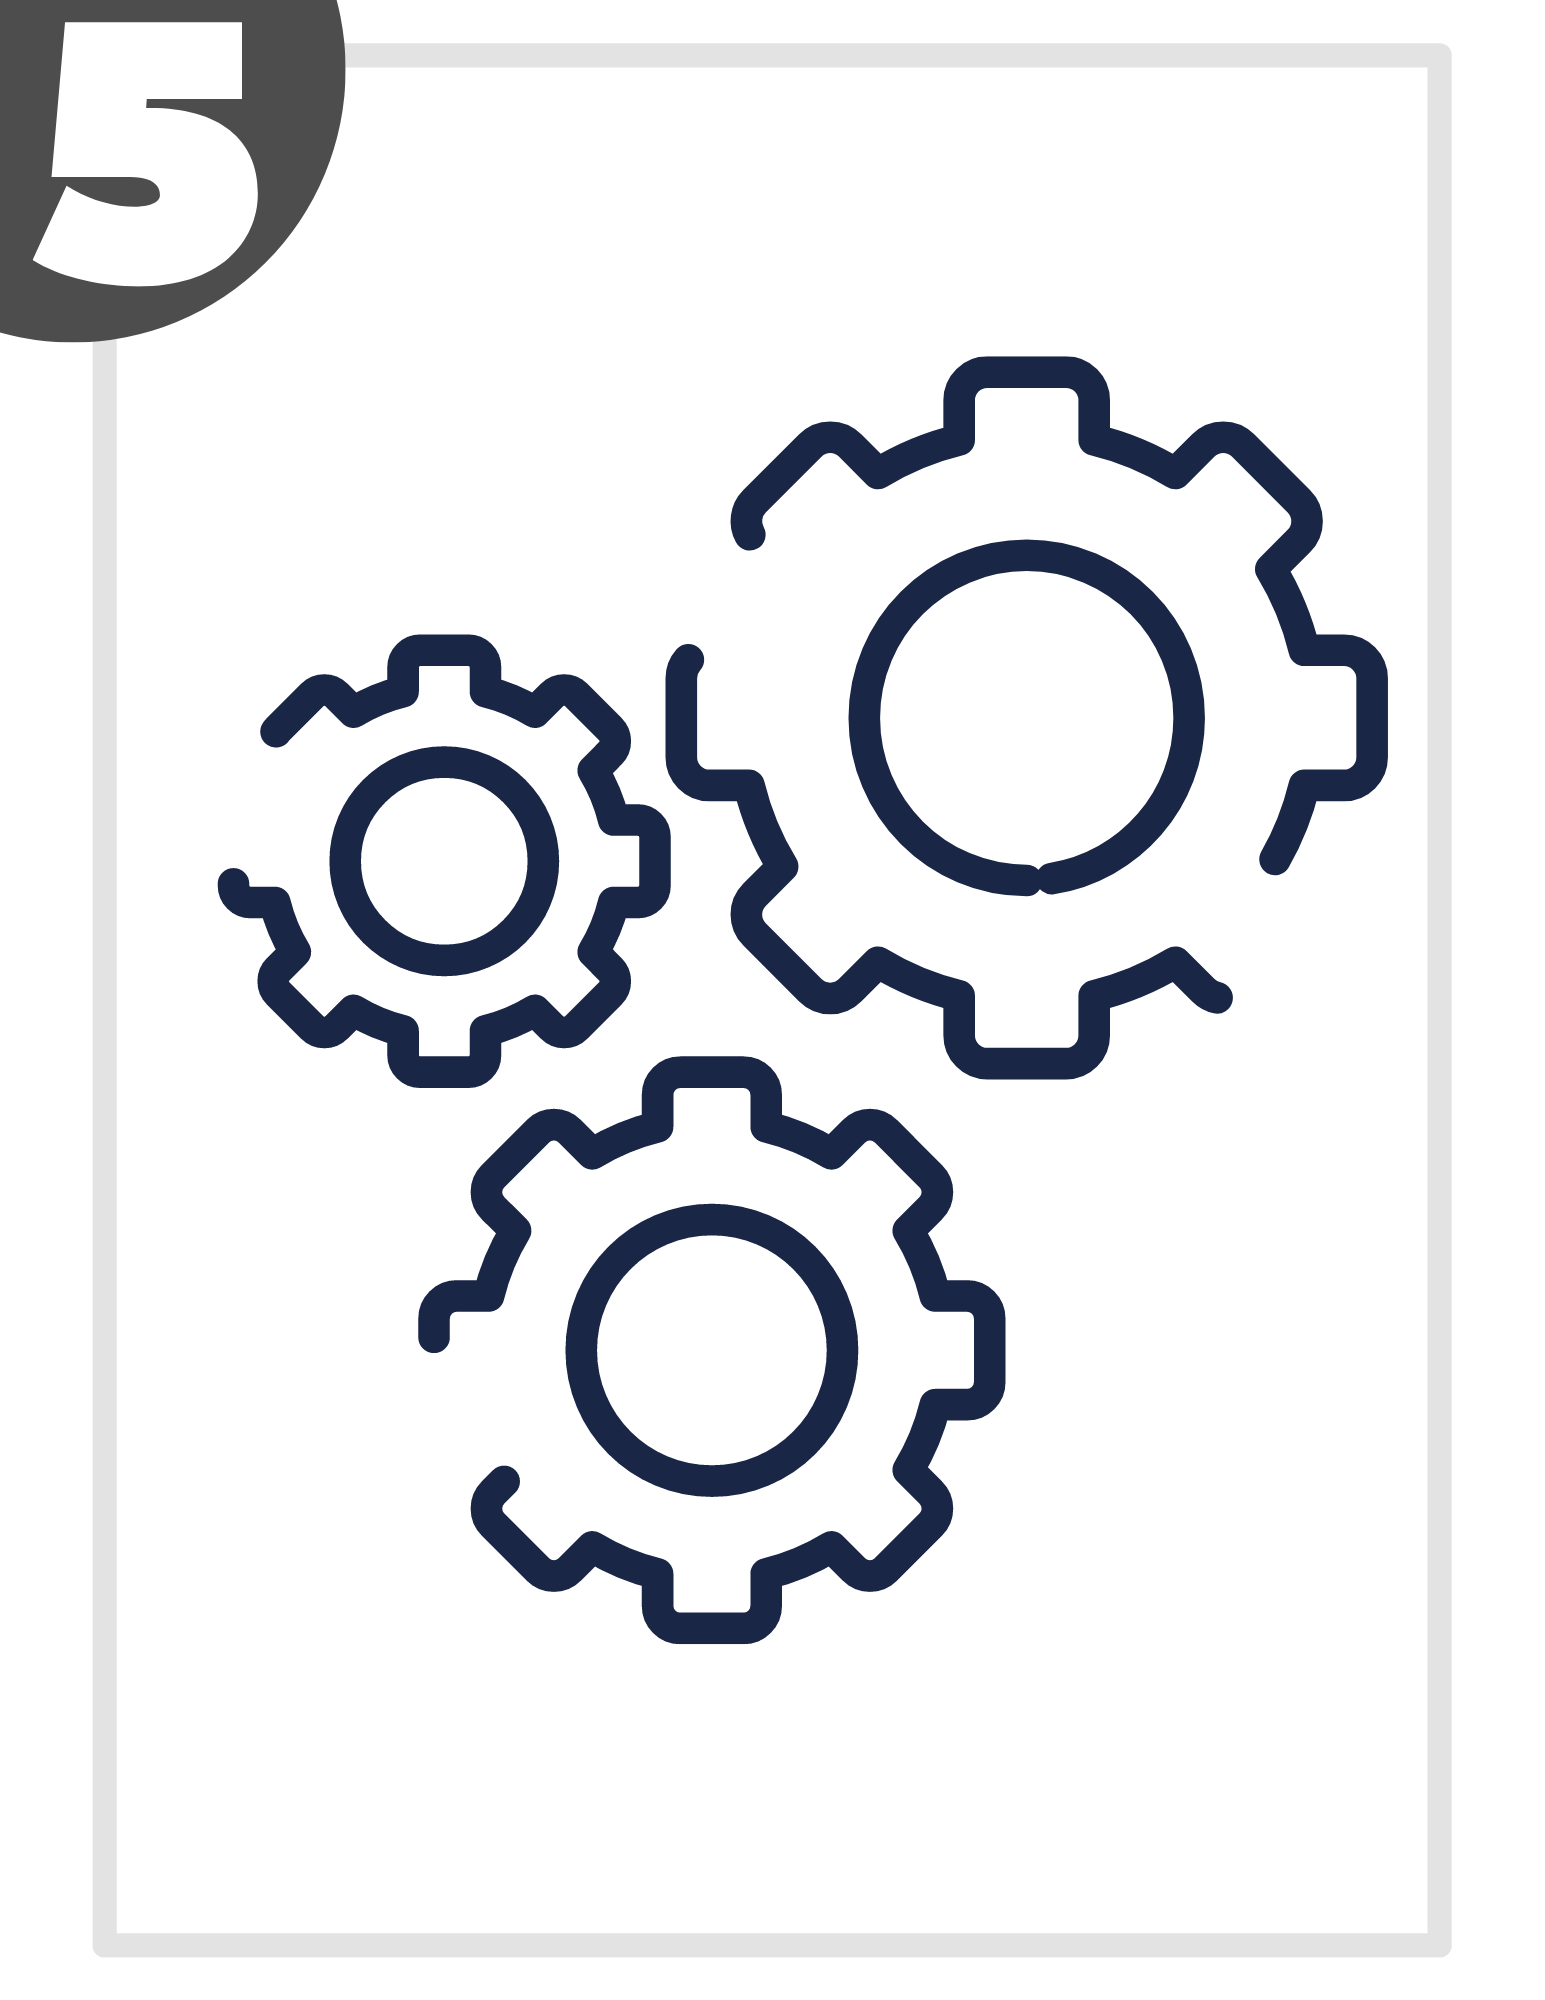 A line drawing of three gears on a white background.